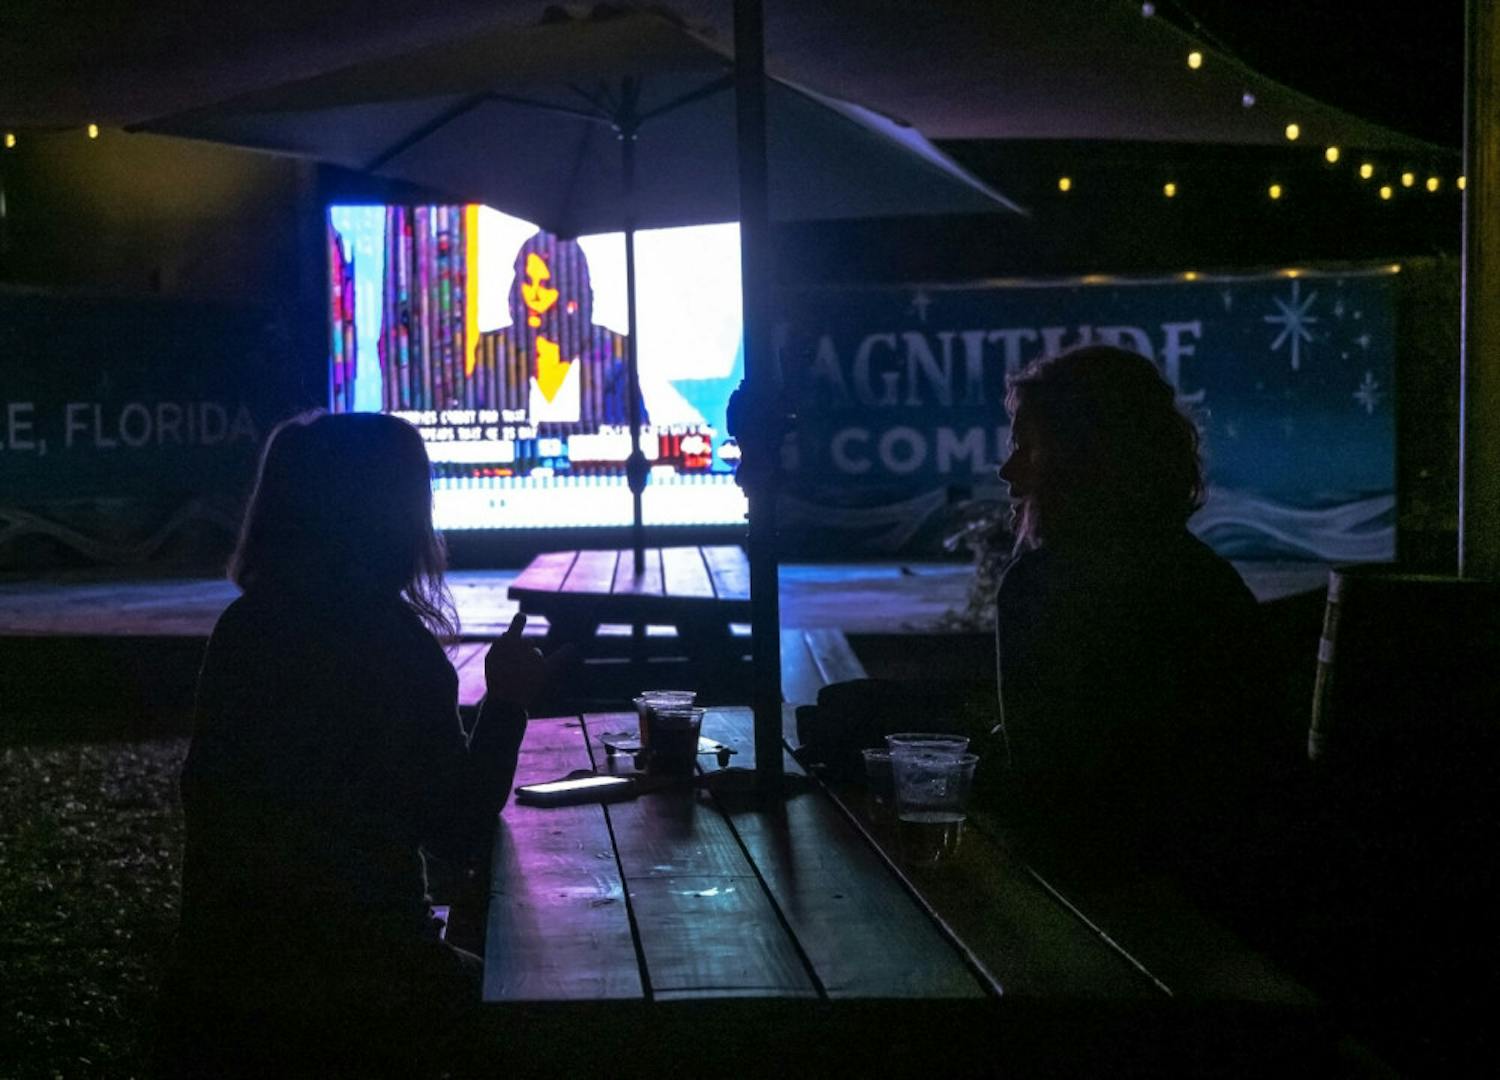 Two women watch the presidential election results at First Magnitude Brewery, located in Gainesville, Fla., on Tuesday, Nov. 3, 2020.